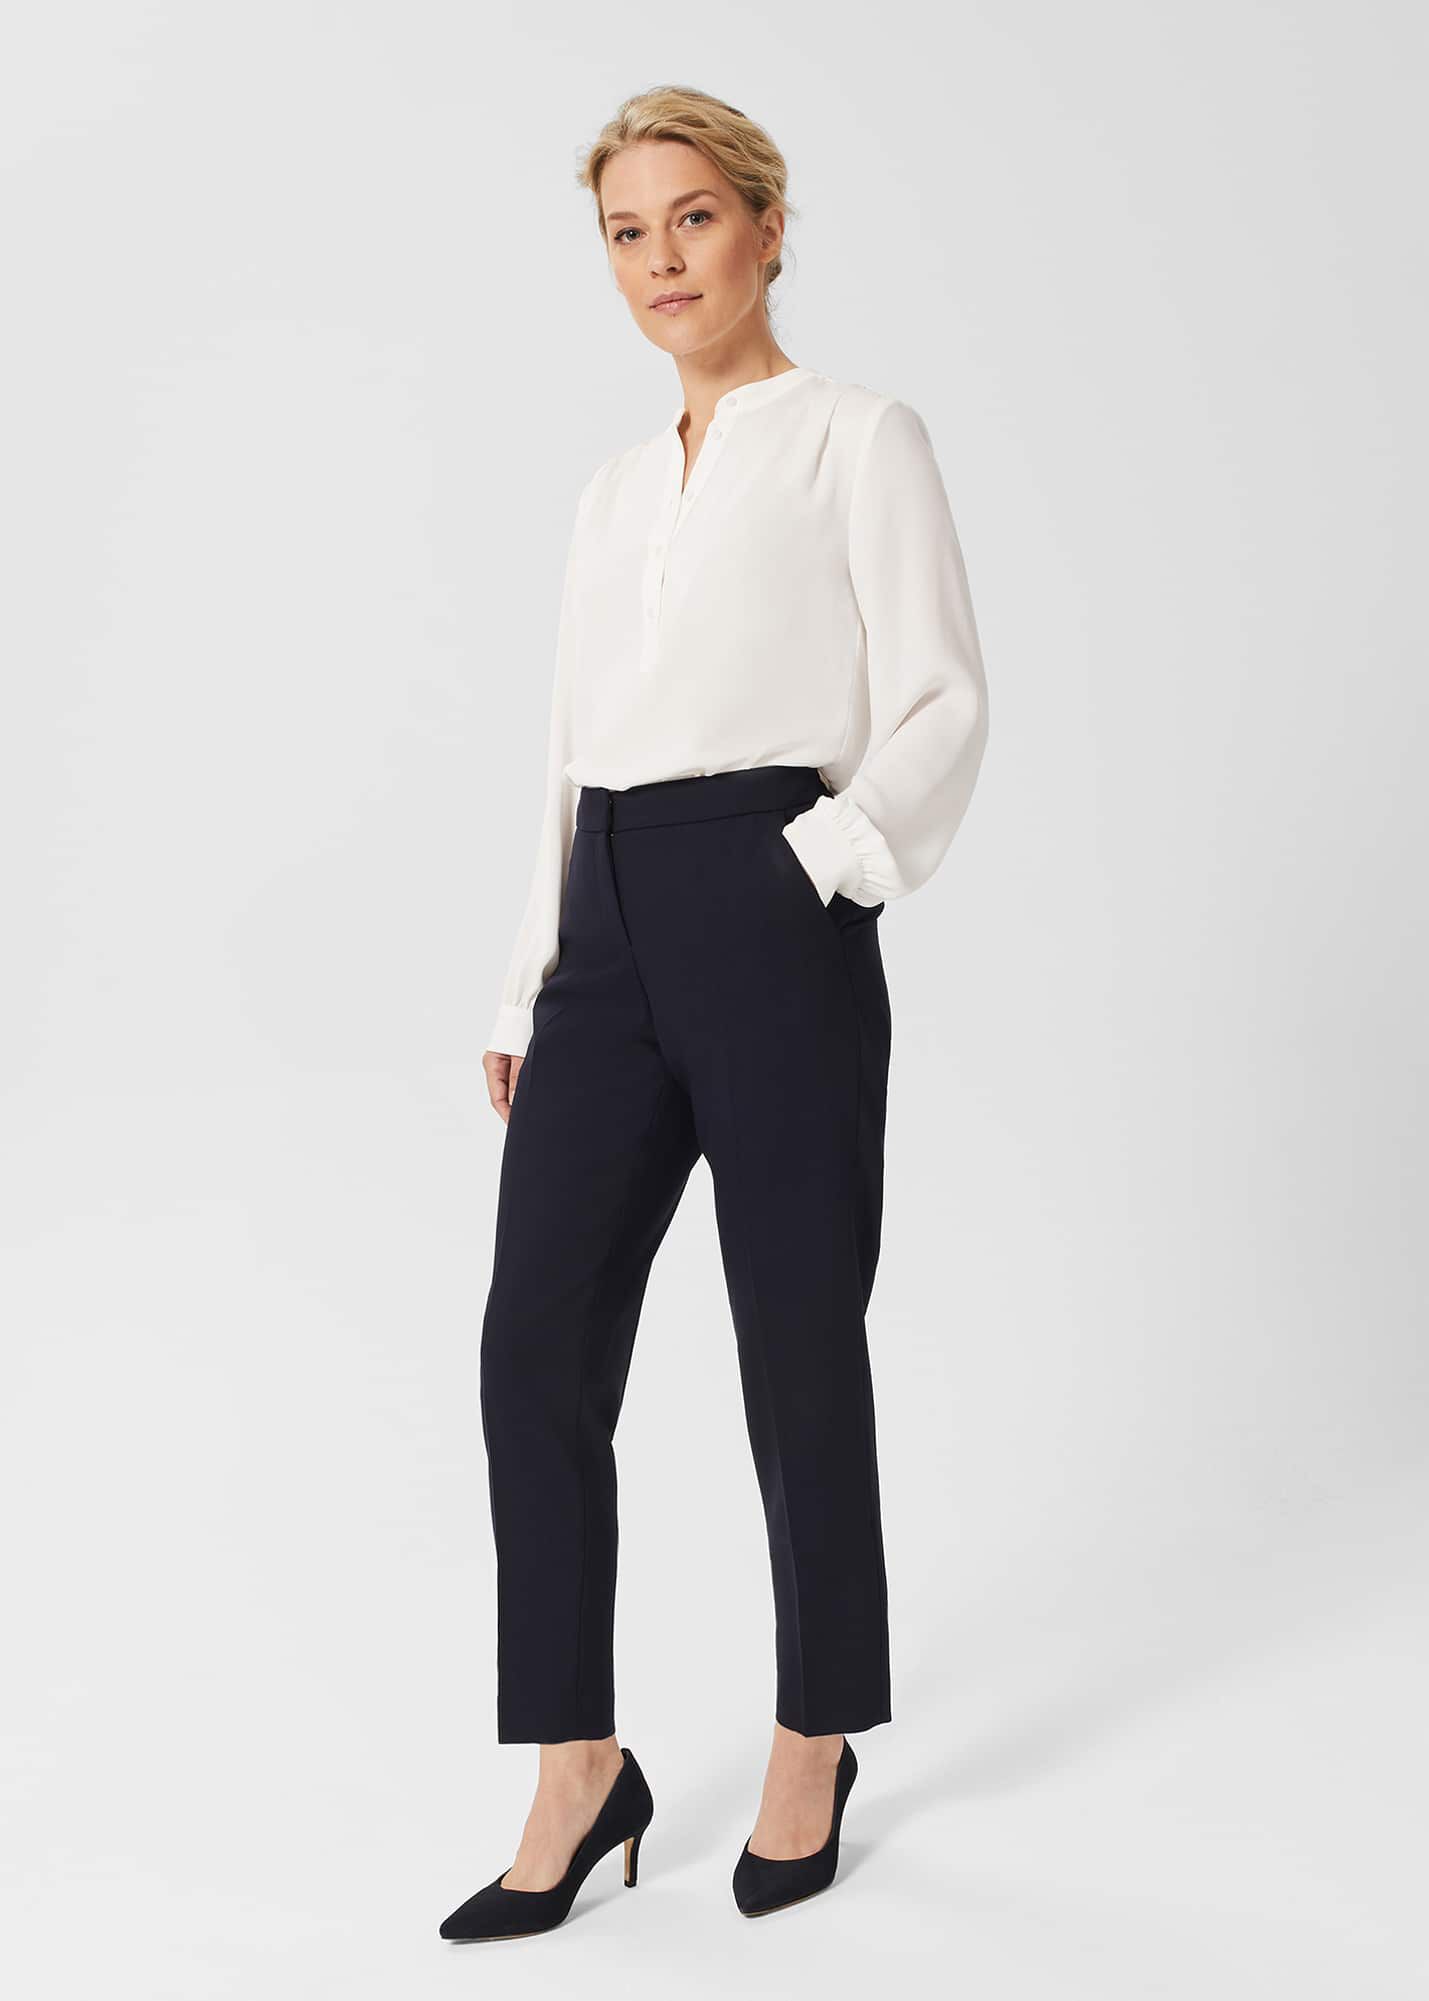 Hobbs Kirsty Cropped Trousers Navy Size UK4 RRP99 